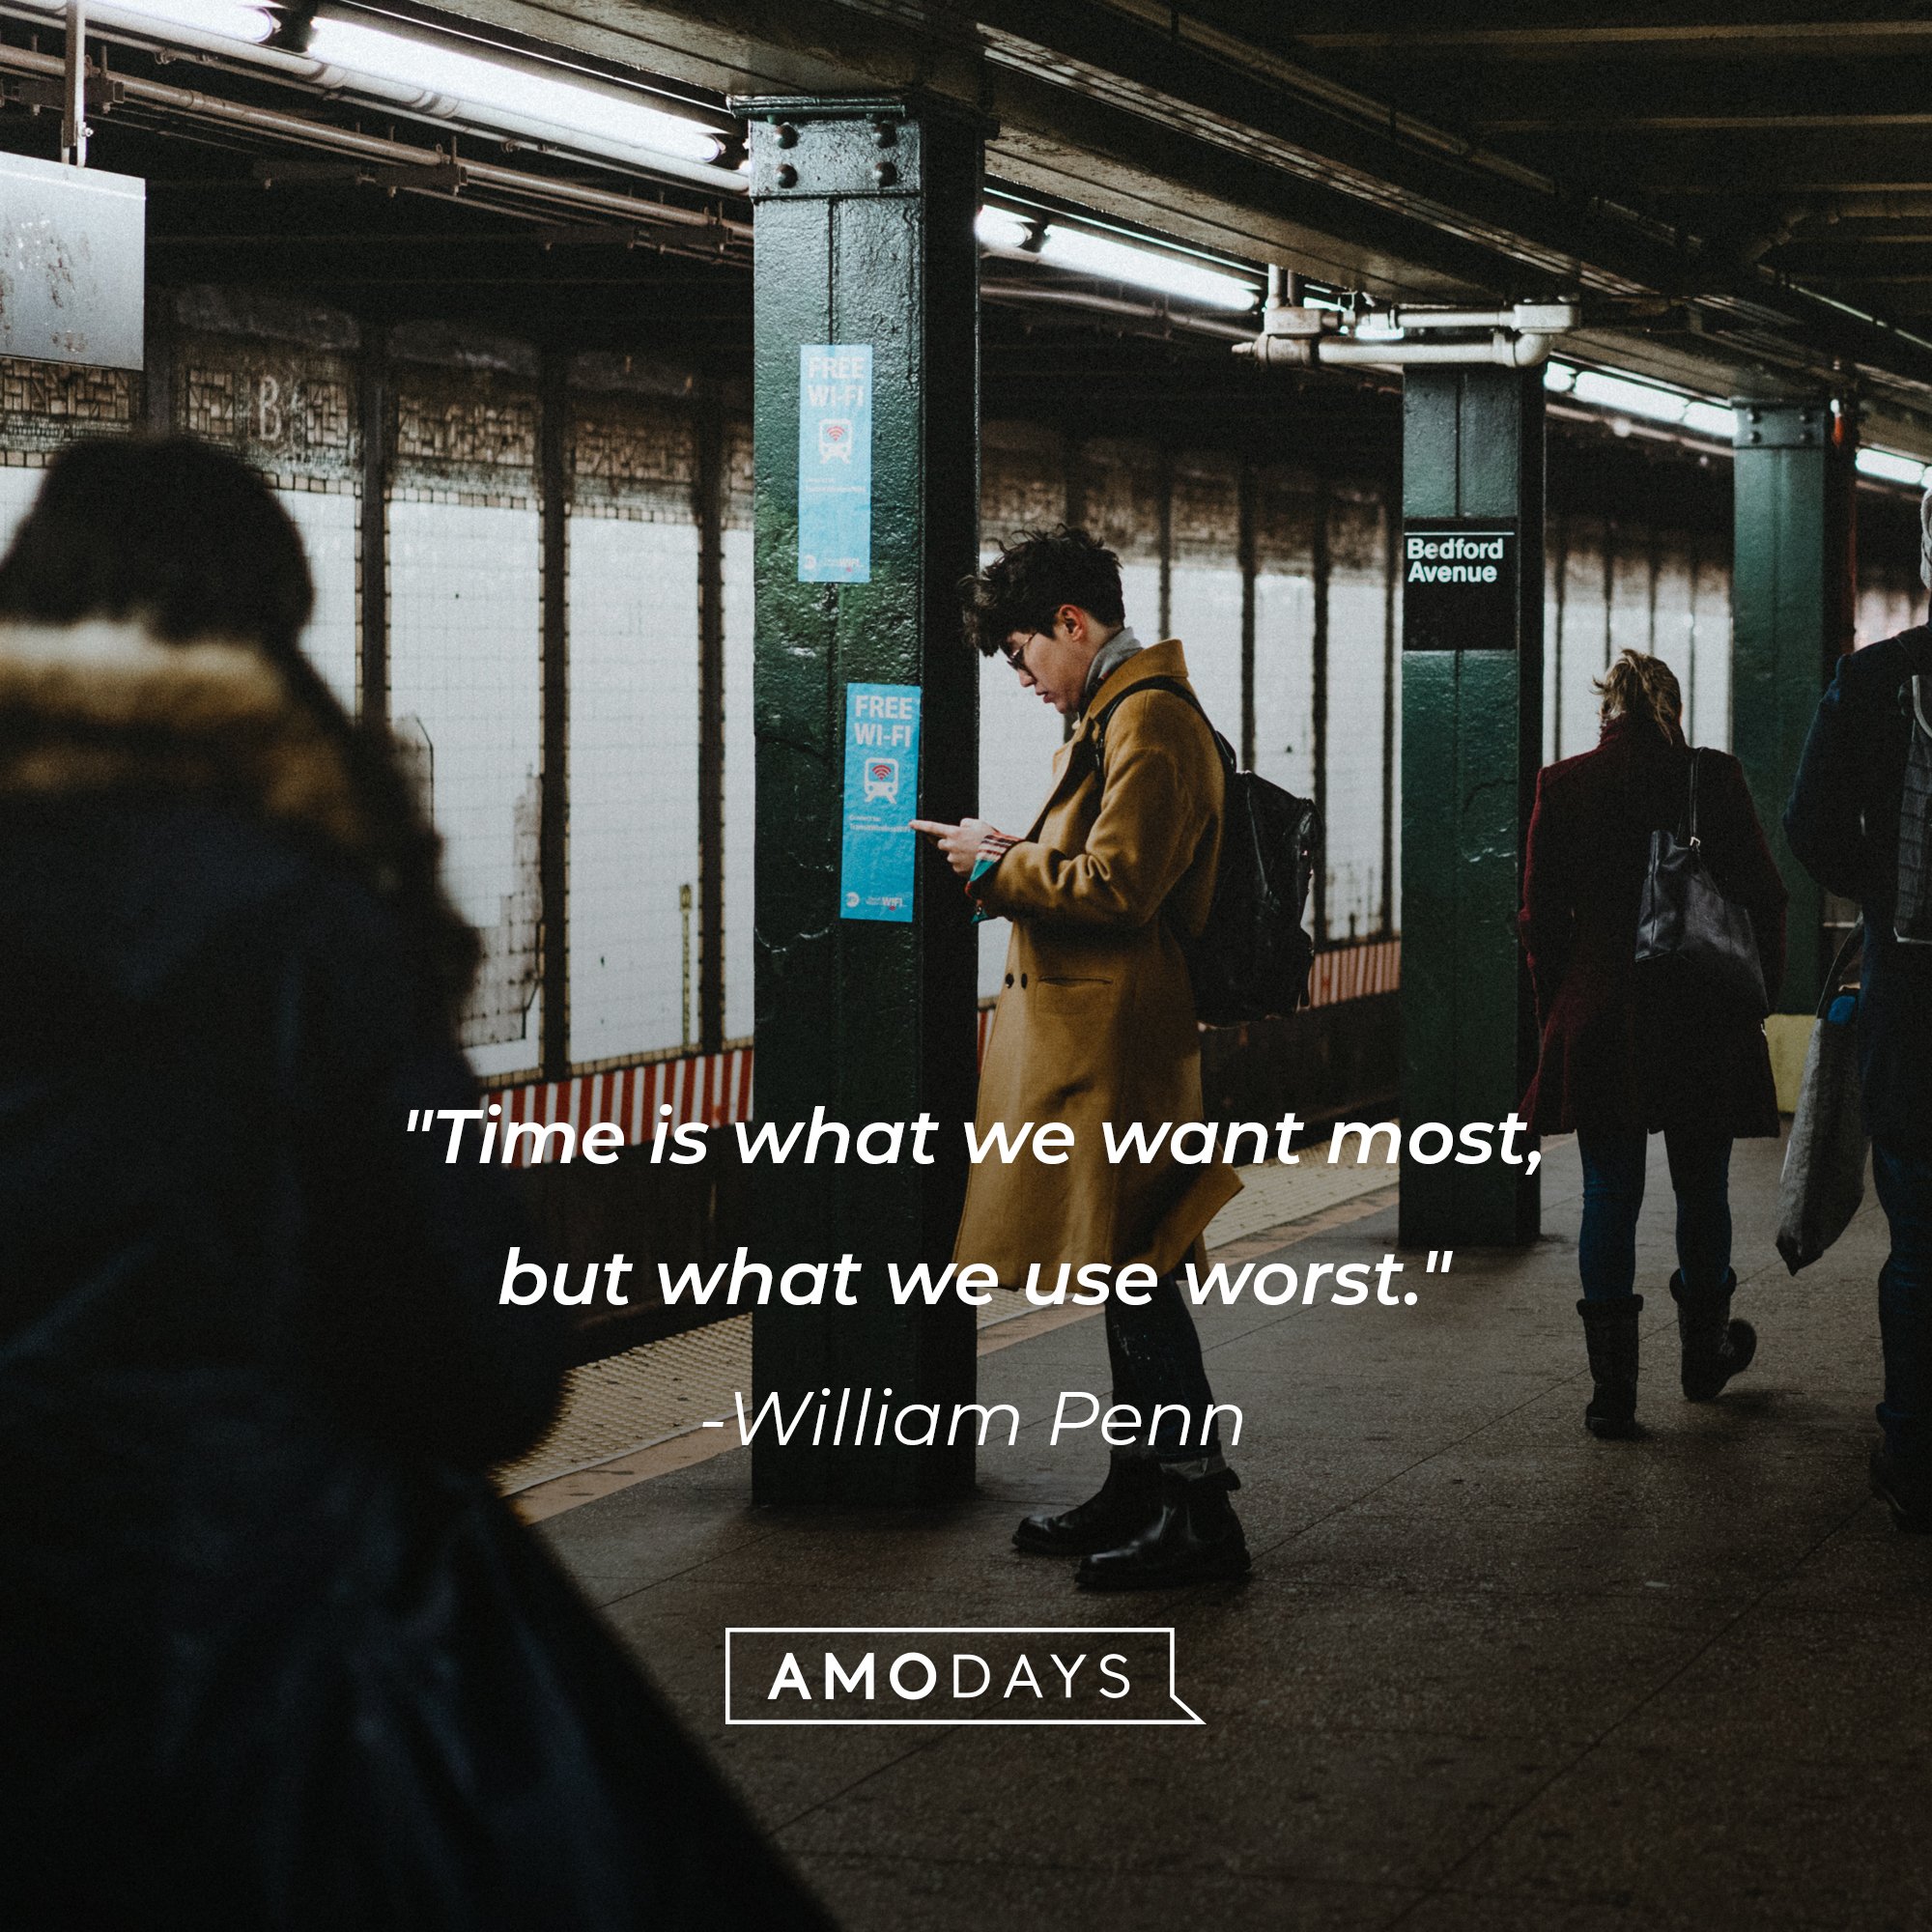 William Penn’s quote: "Time is what we want most, but what we use worst." | Image: AmoDays 